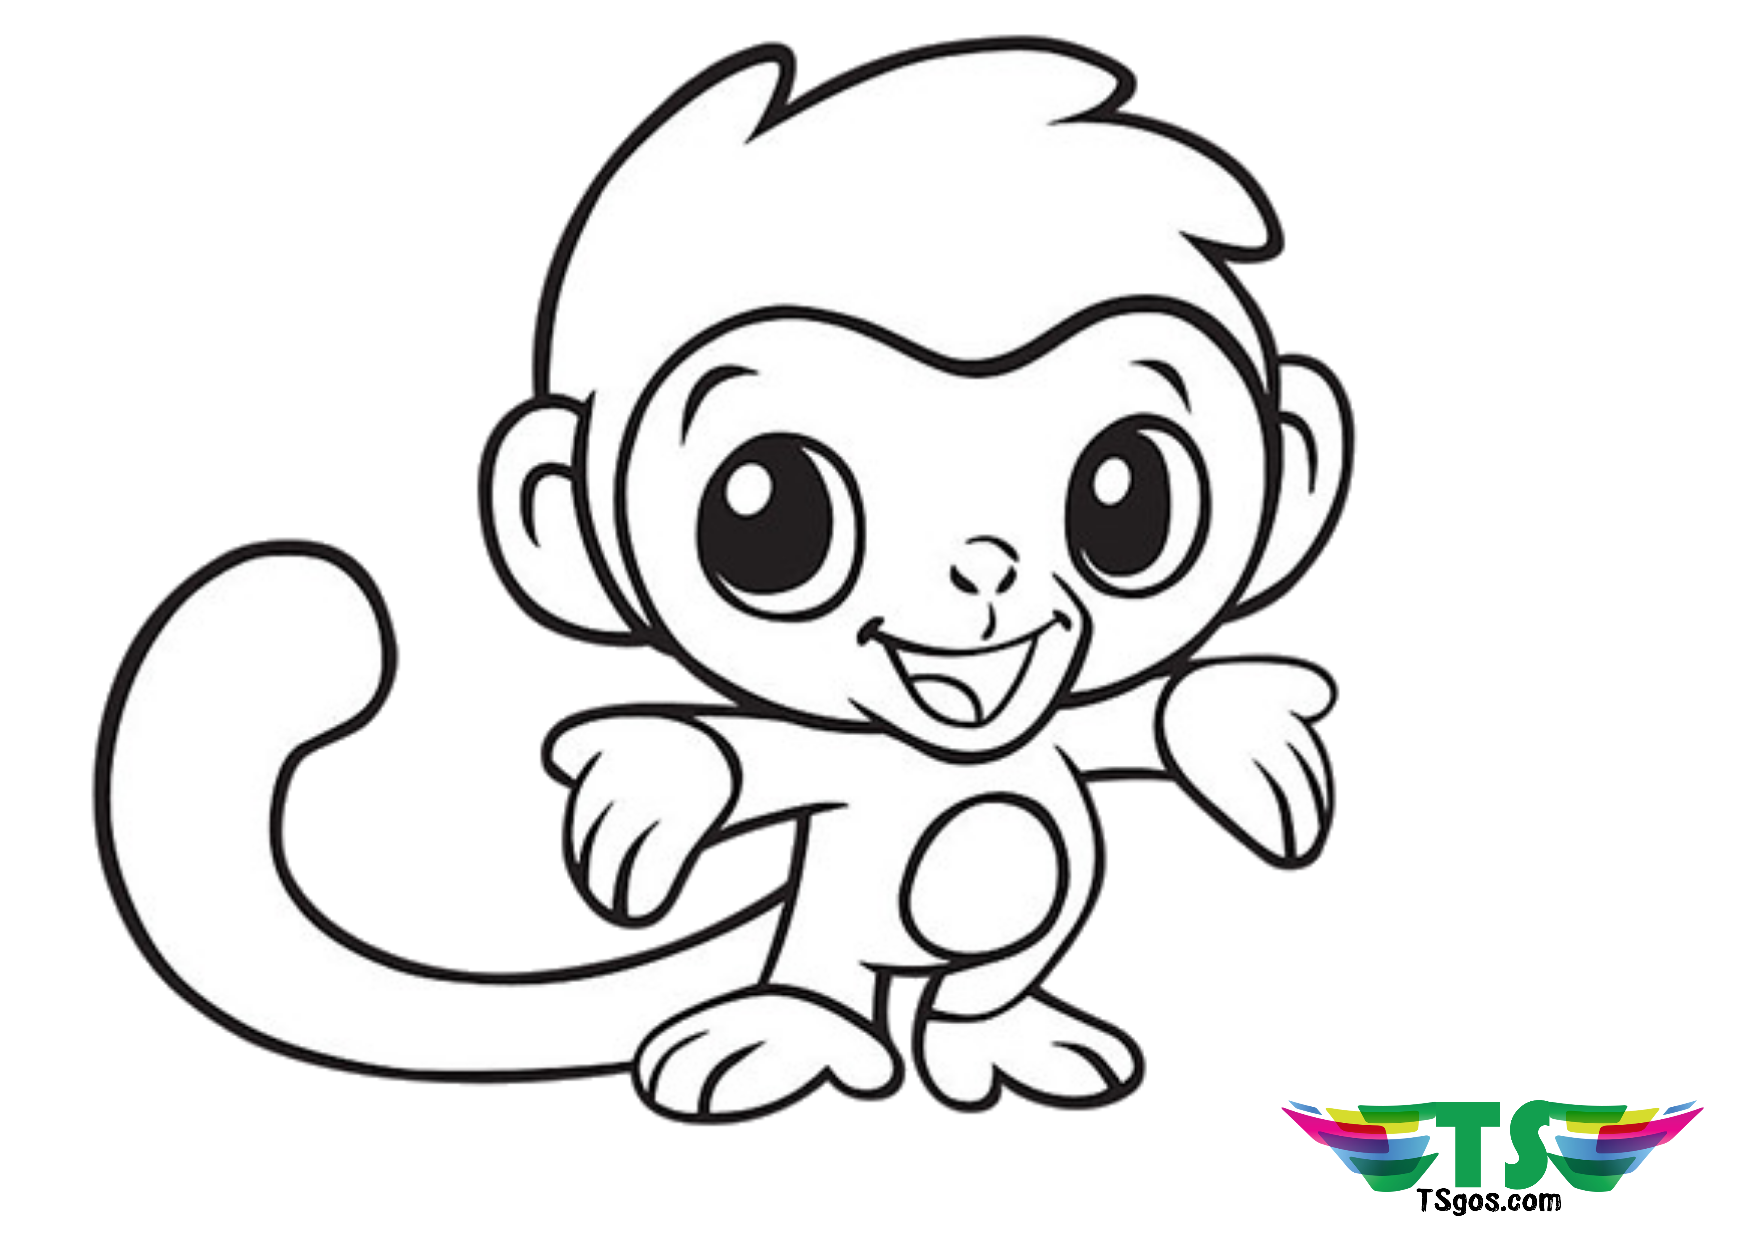 Free download to print cute baby monkey coloring page.